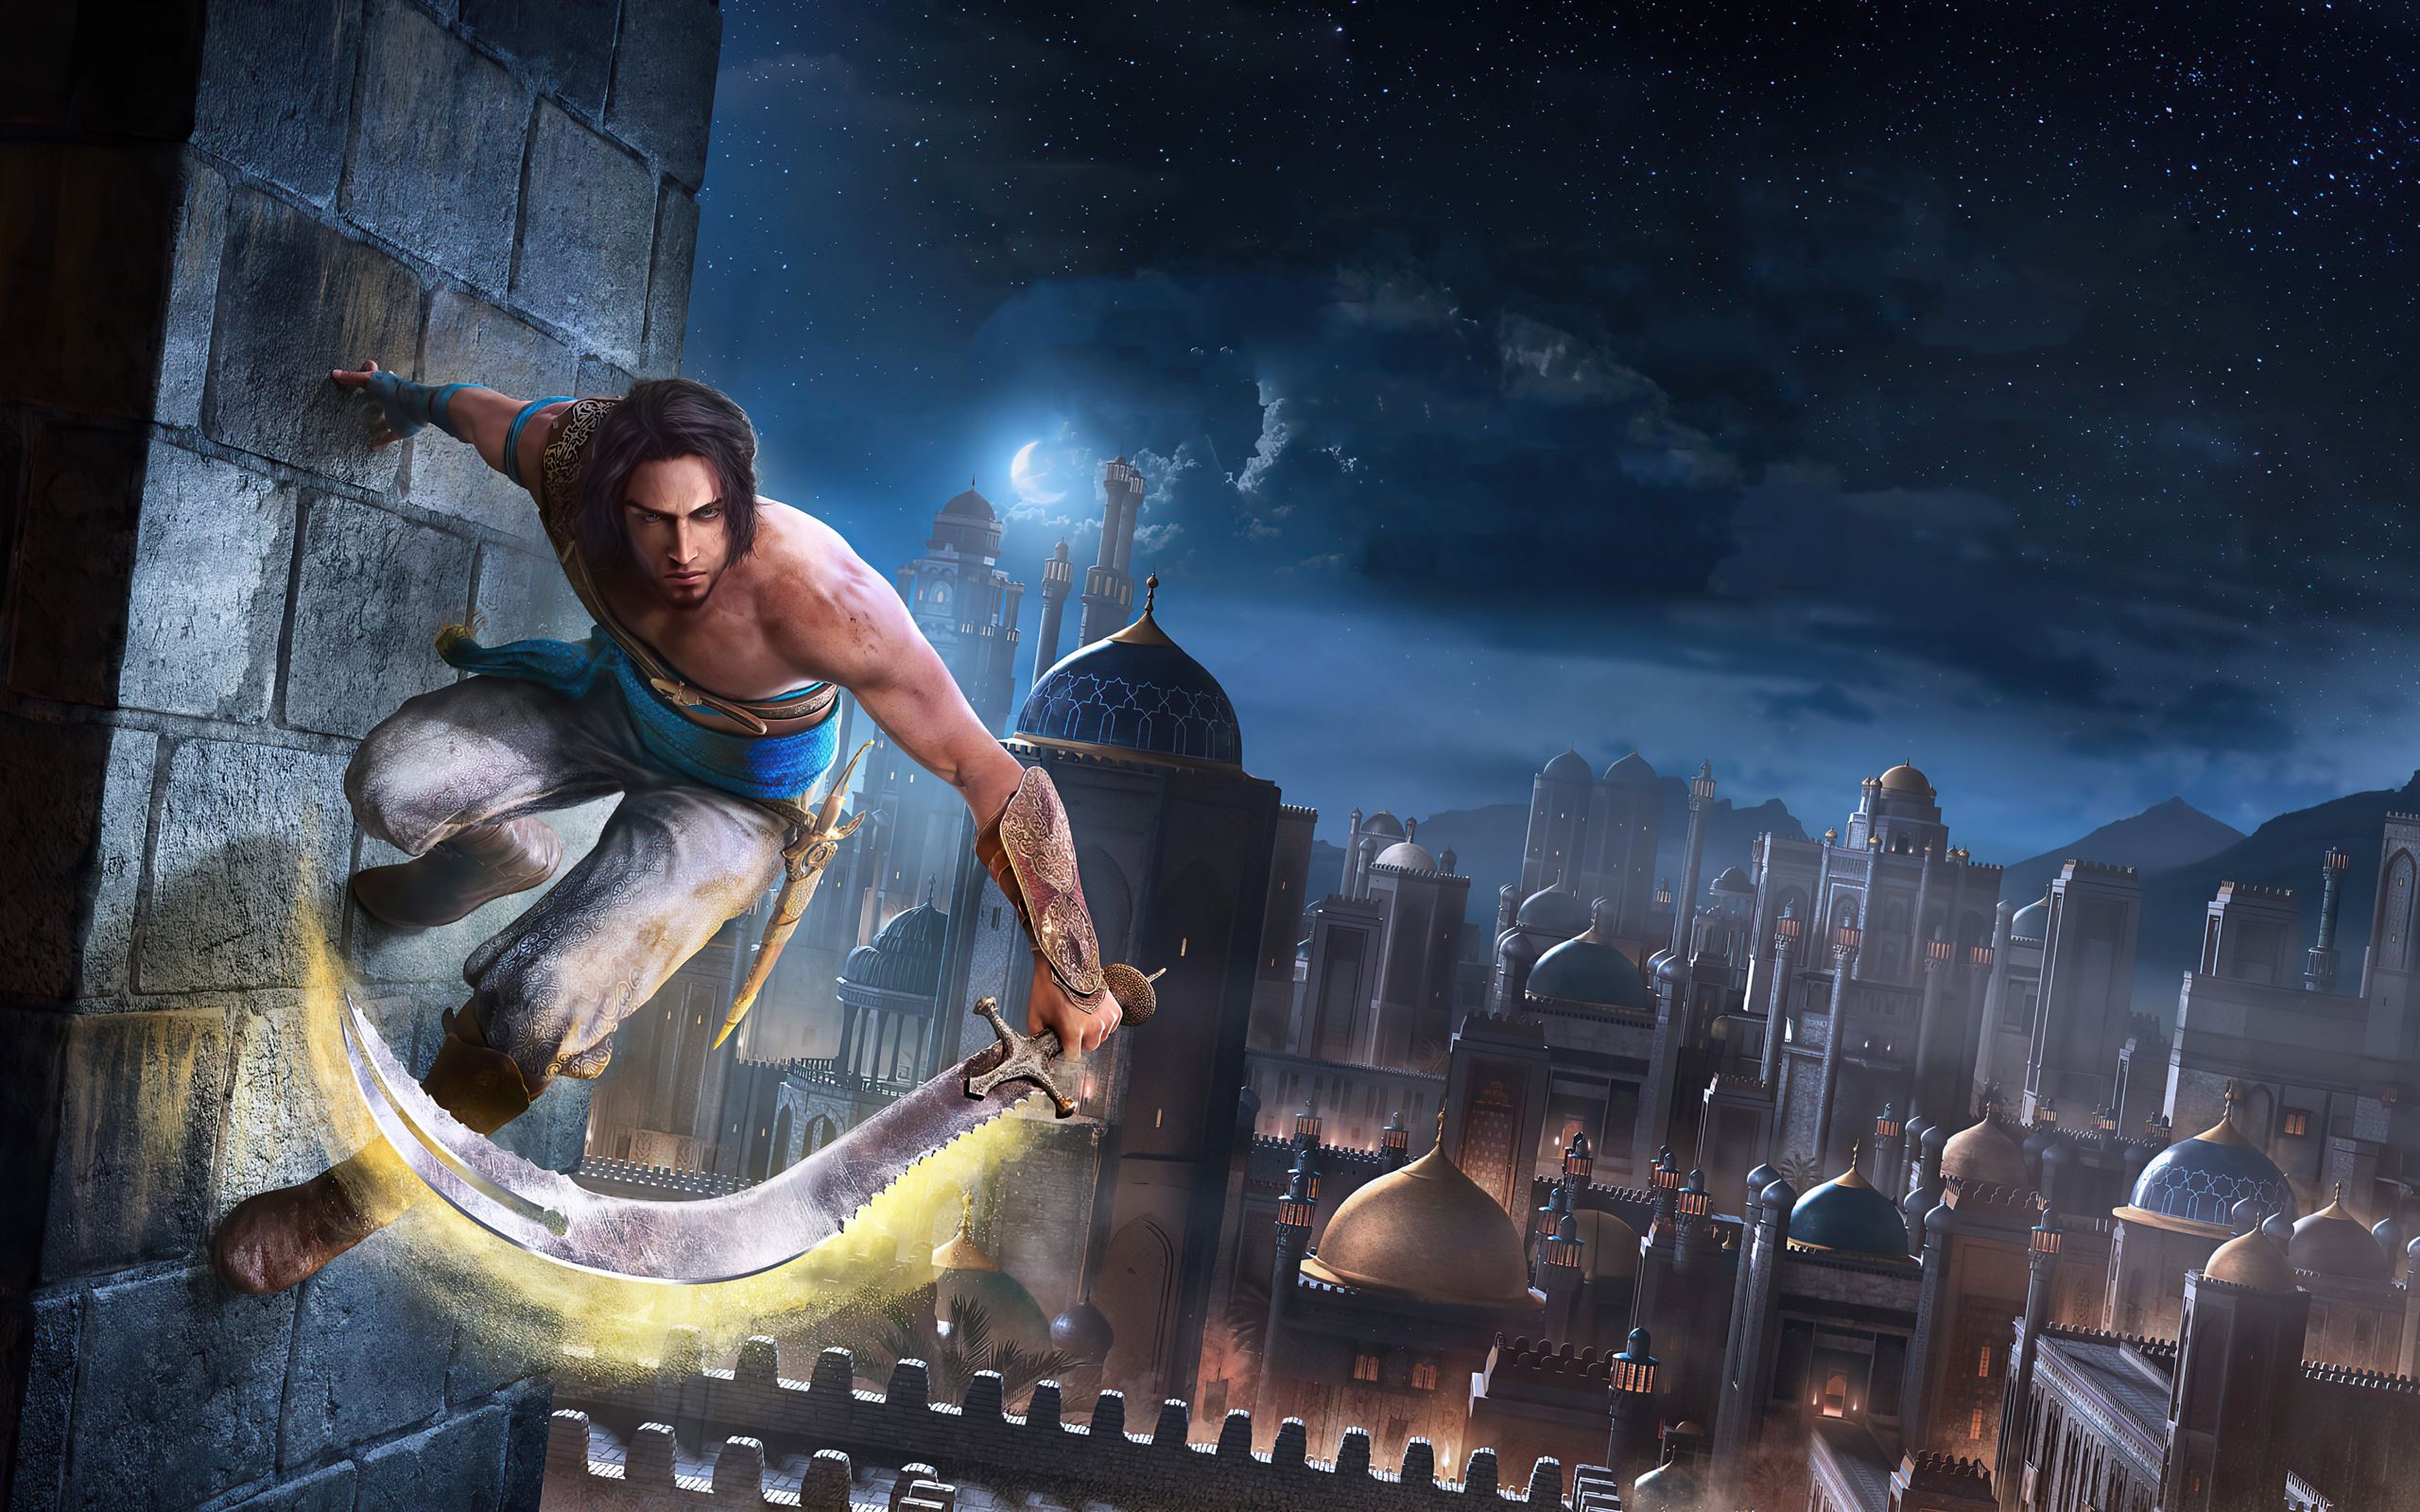 prince of persia the sands of time remake 2021 MacBook Air Wallpaper Download